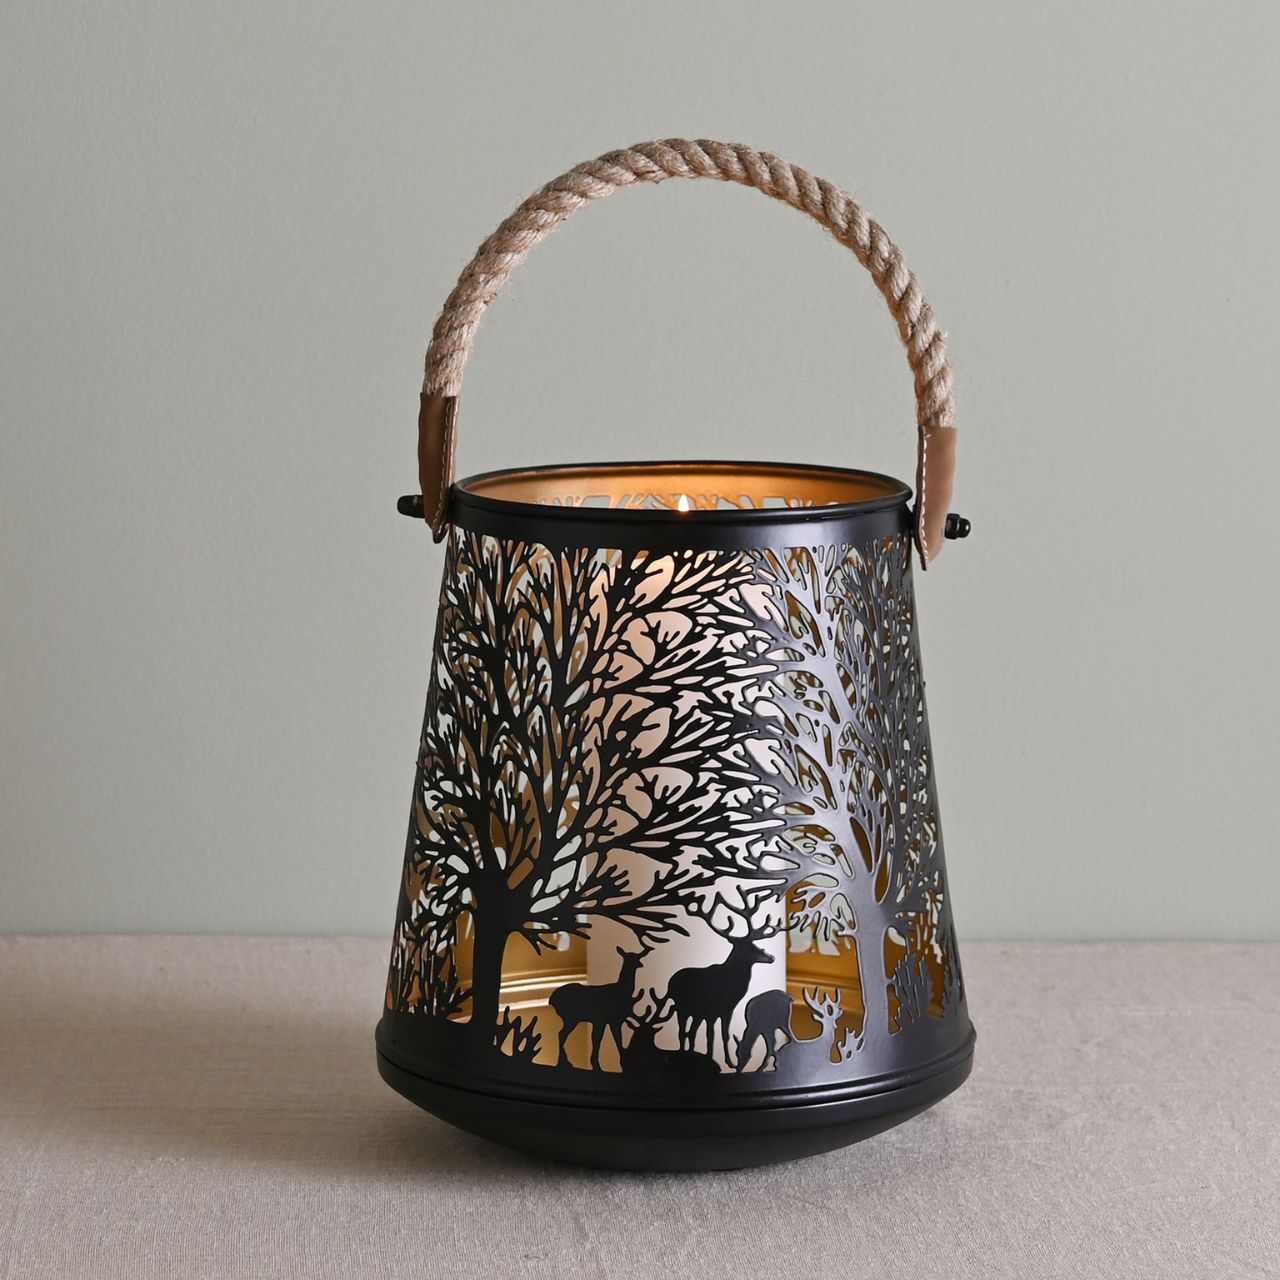 Deer Silhouette Christmas Lantern with Rope Handle  A deer silhouette lantern with rope handle.  This enchanting lantern glistens with festive charm throughout the Christmas period.